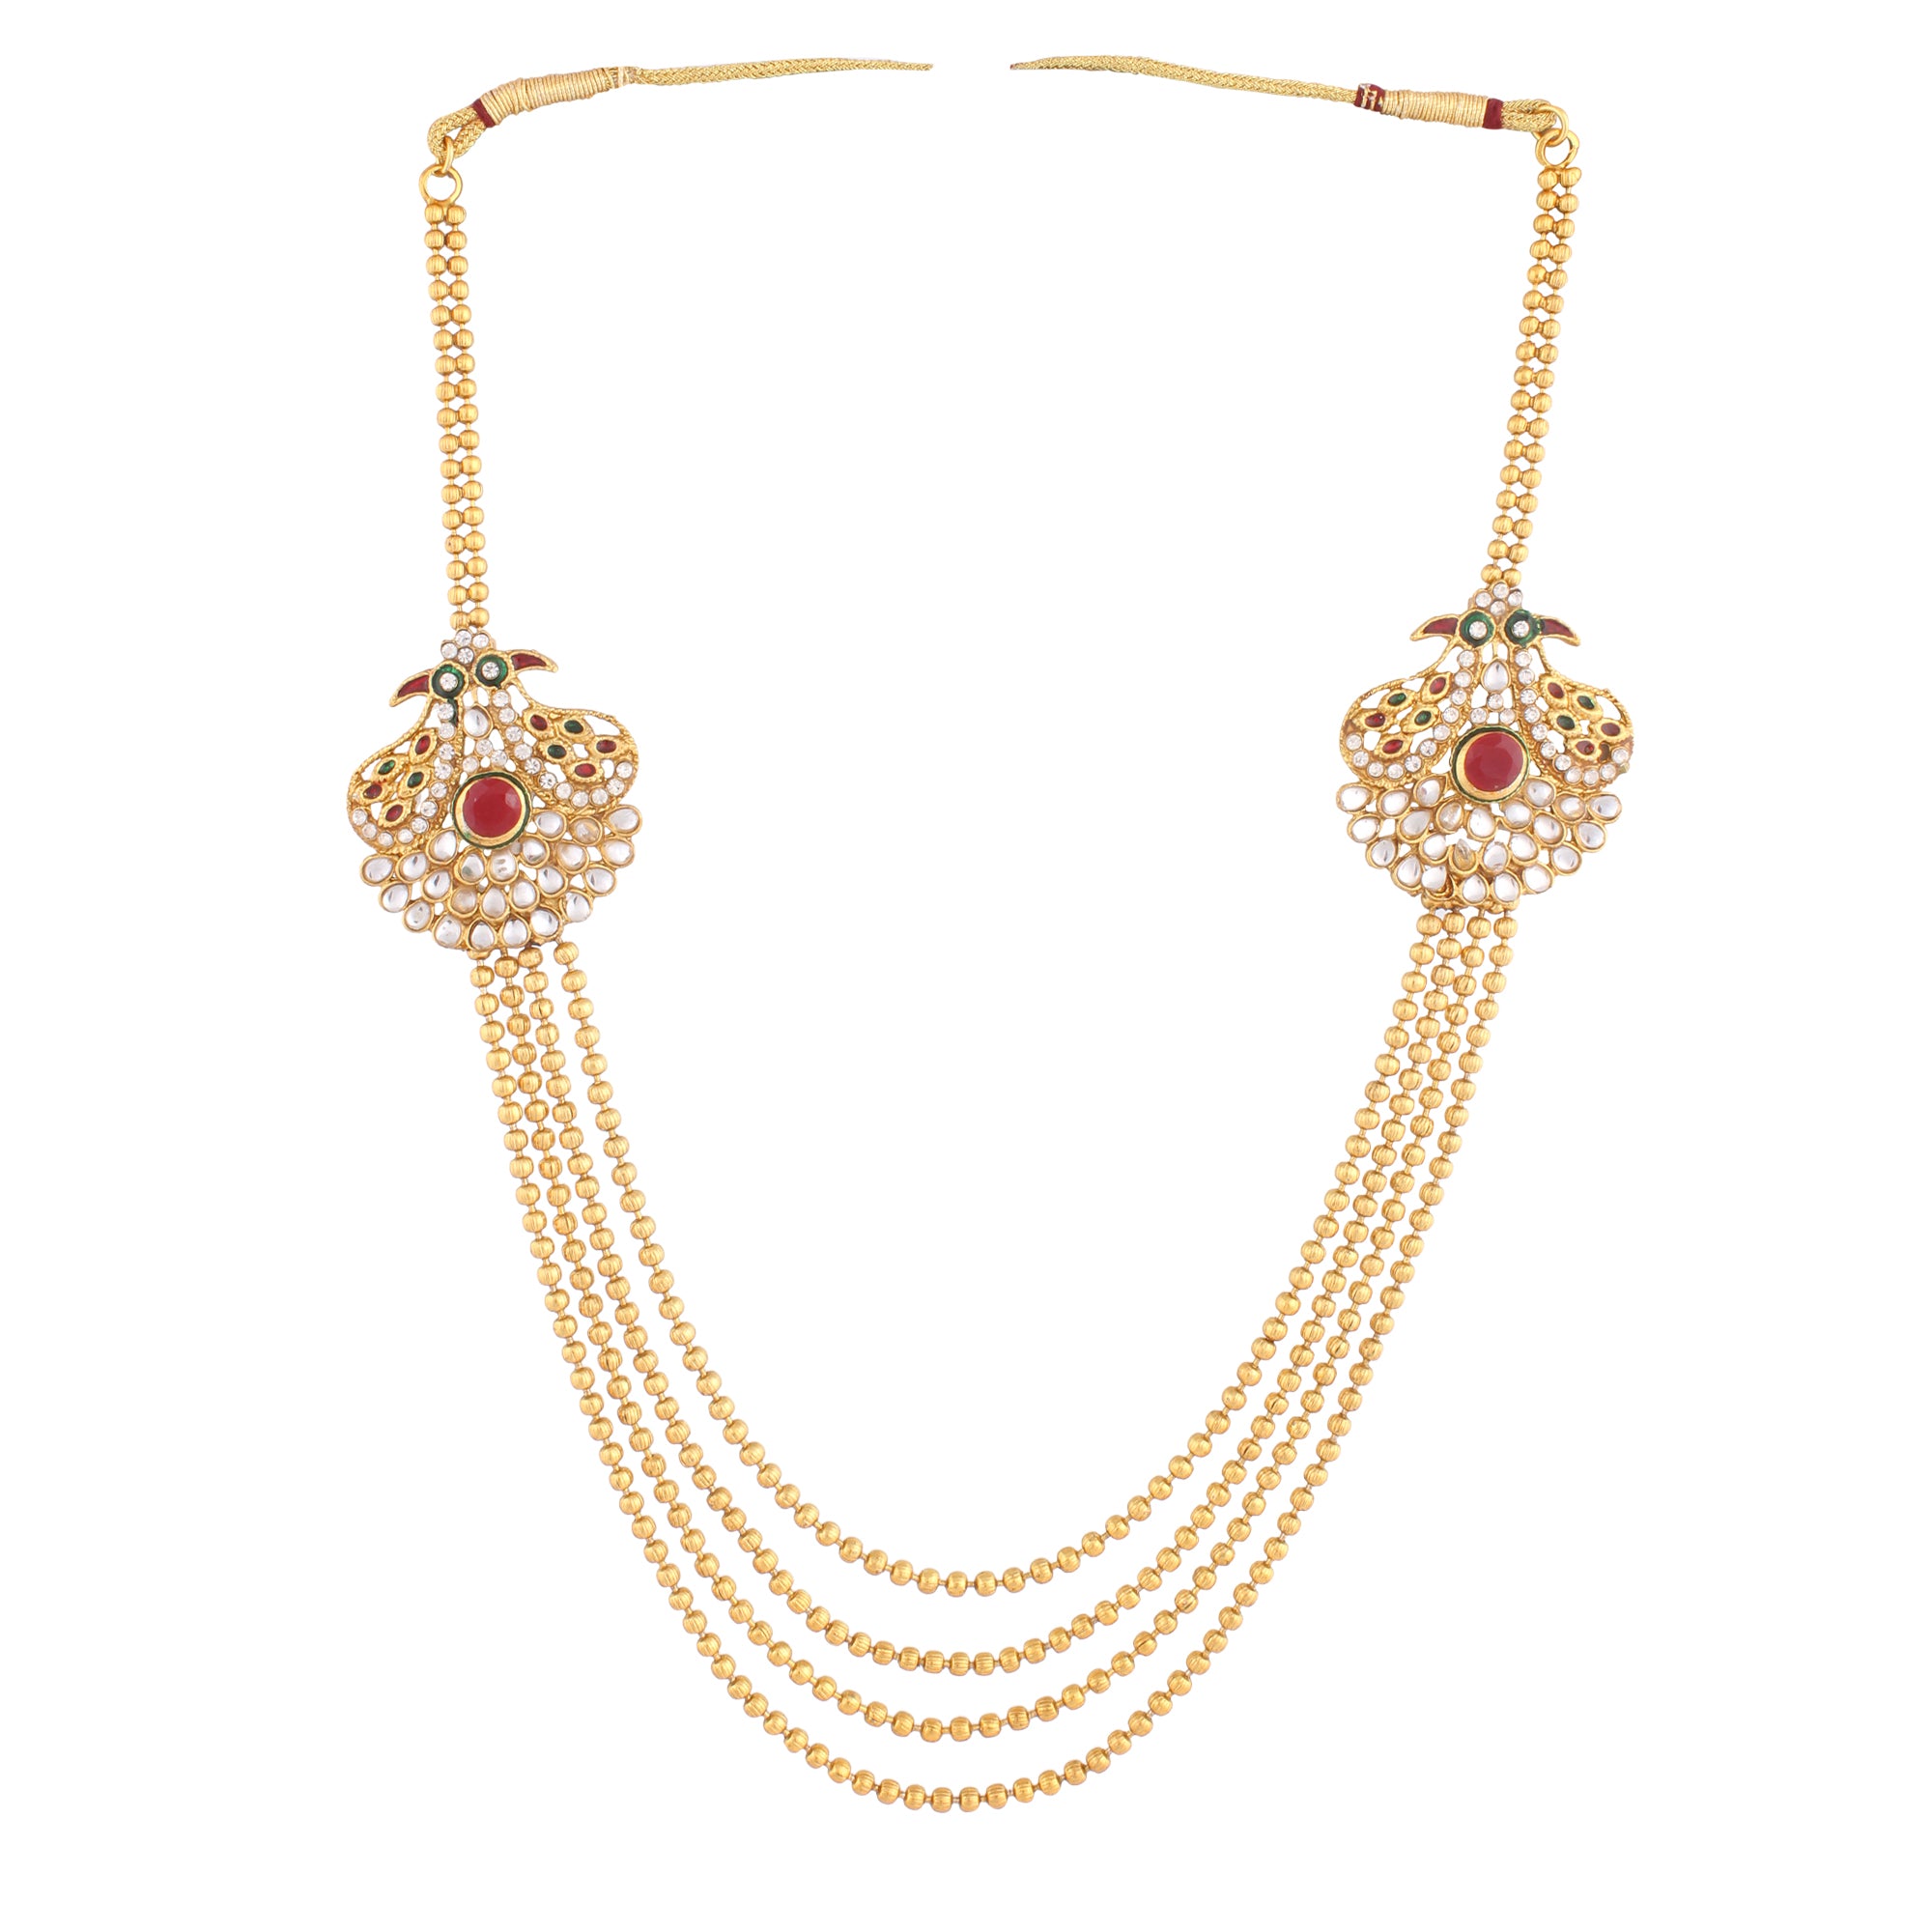 Indian Jewellery from Meira Jewellery:Necklace,Gold Plated Multi-Strand Necklace With Earrings Set For Women